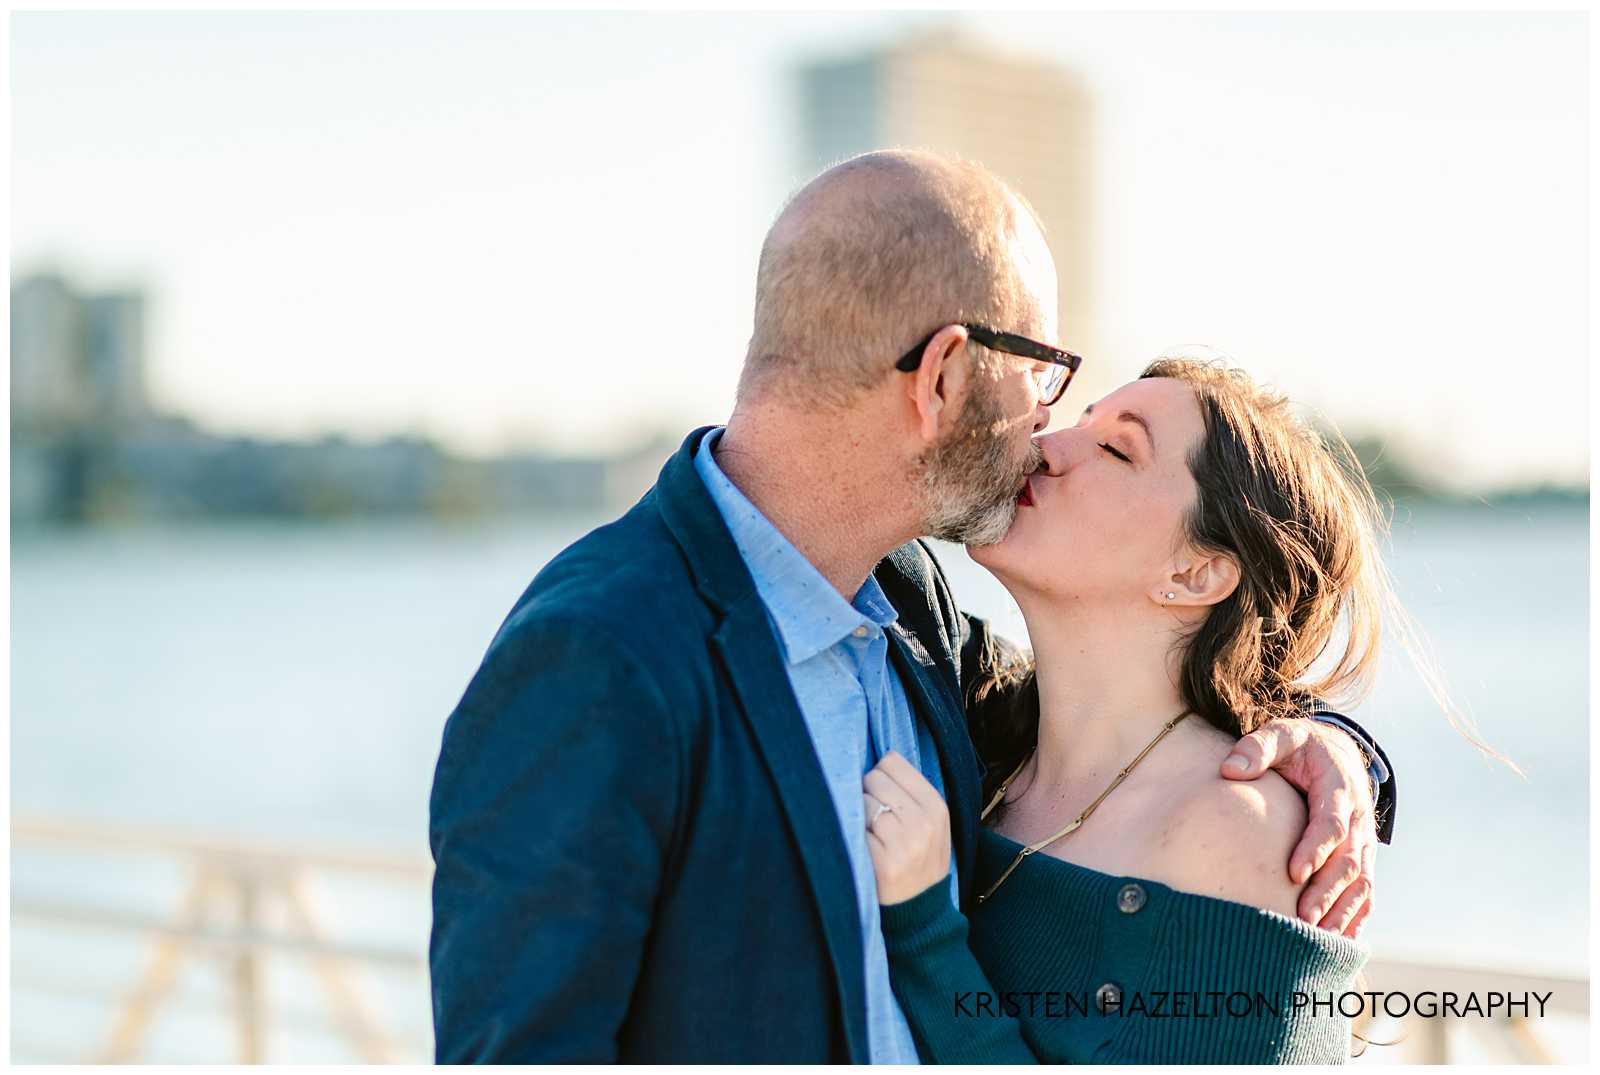 Man and woman kissing at their engagement photoshoot at Lake Merritt in Oakland California